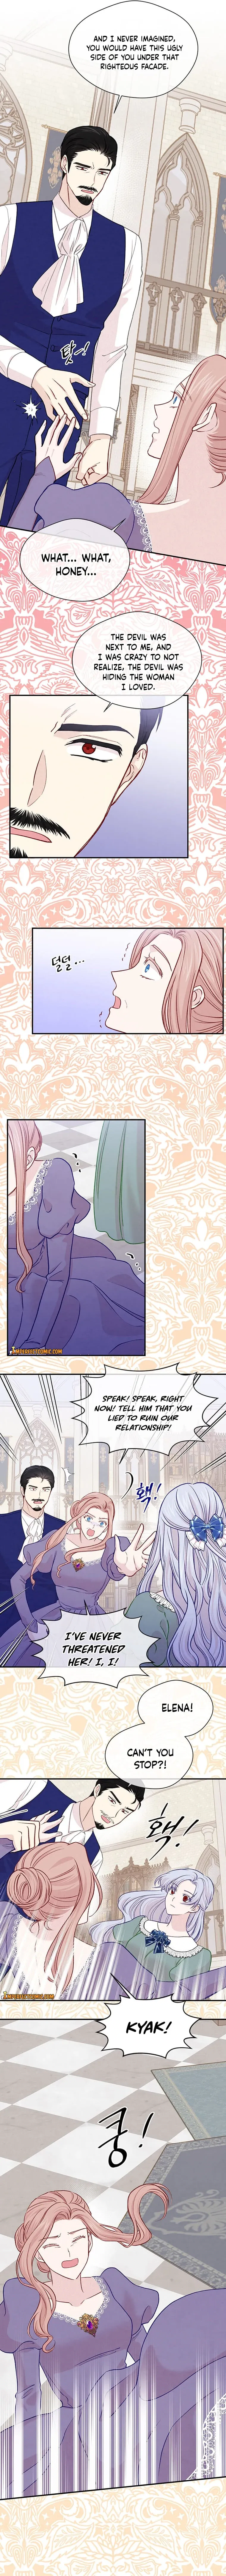 IRIS - Lady with a Smartphone Chapter 129 page 4